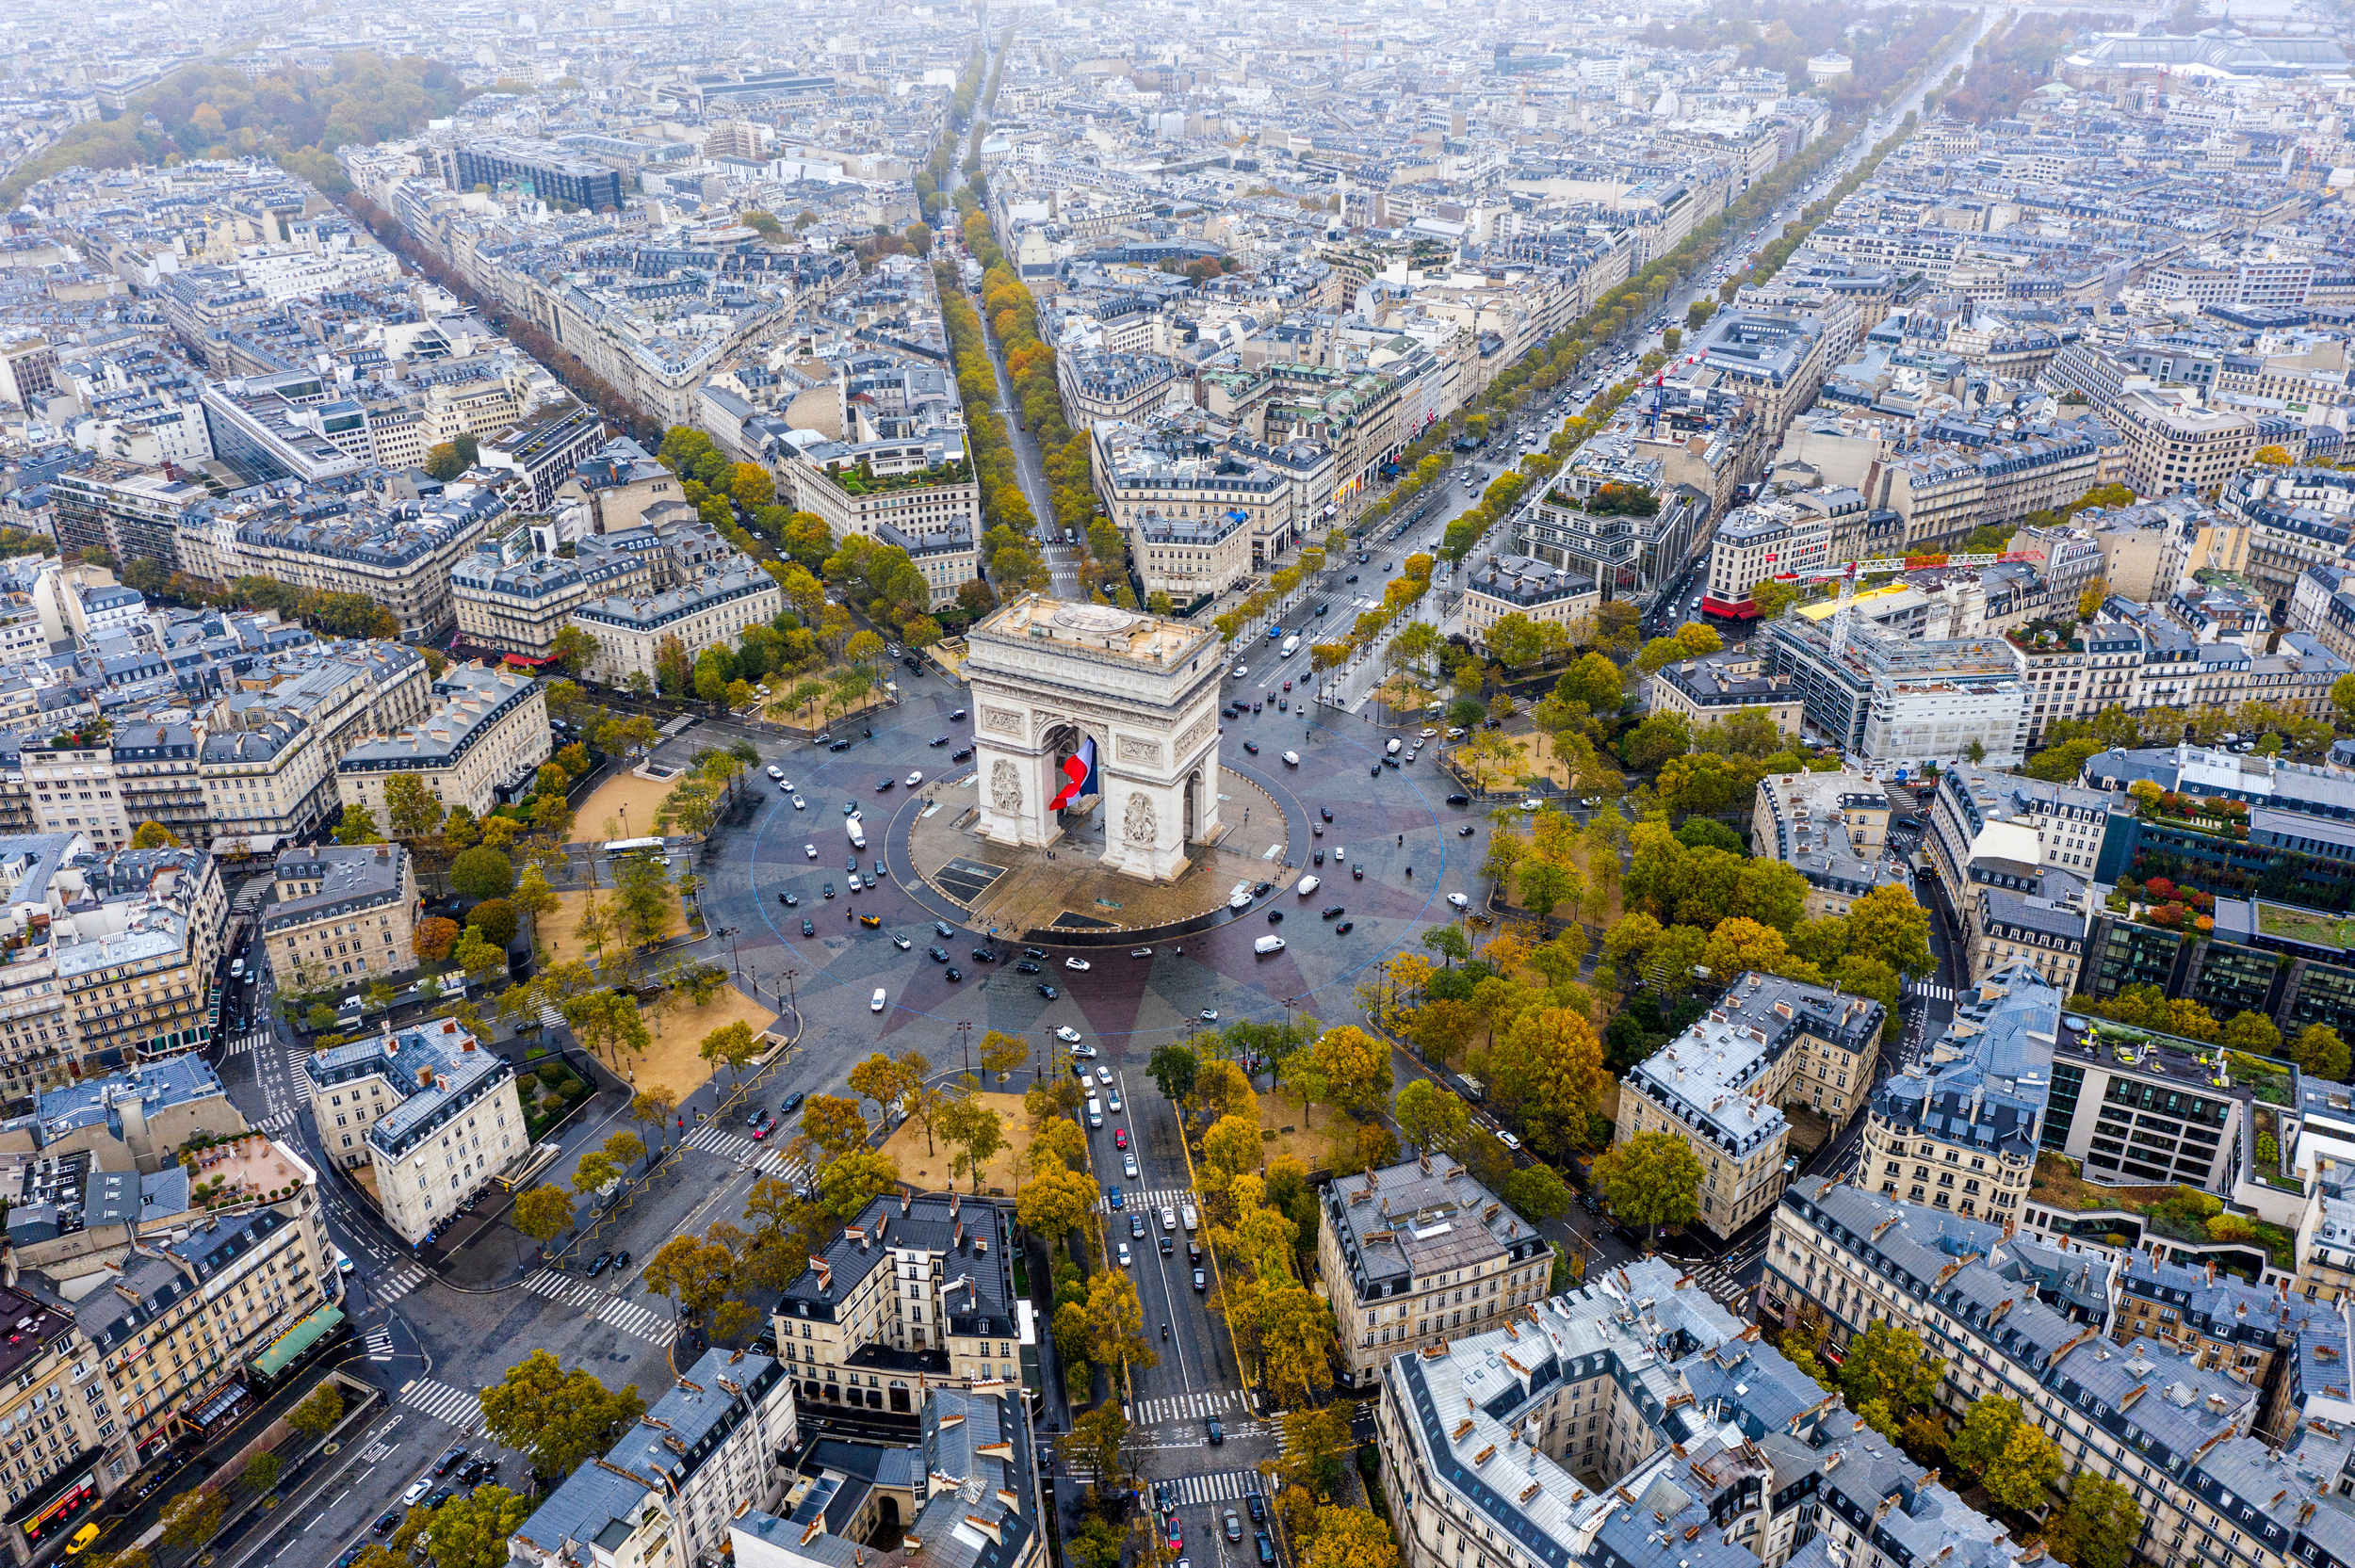 <p>You know that giant arch you see a bunch of cars driving around all over Instagram? That’s the Arc de Triomphe, one of Paris’ most iconic sites. To reach the Arc, stroll the Champs-Élysées and enjoy one of the best shopping streets in Paris.</p><p>You may also like: <a href='https://www.yardbarker.com/lifestyle/articles/13_ben_jerrys_flavors_we_love_and_13_we_can_do_without_012324/s1__37671486'>13 Ben & Jerry’s flavors we love and 13 we can do without</a></p>